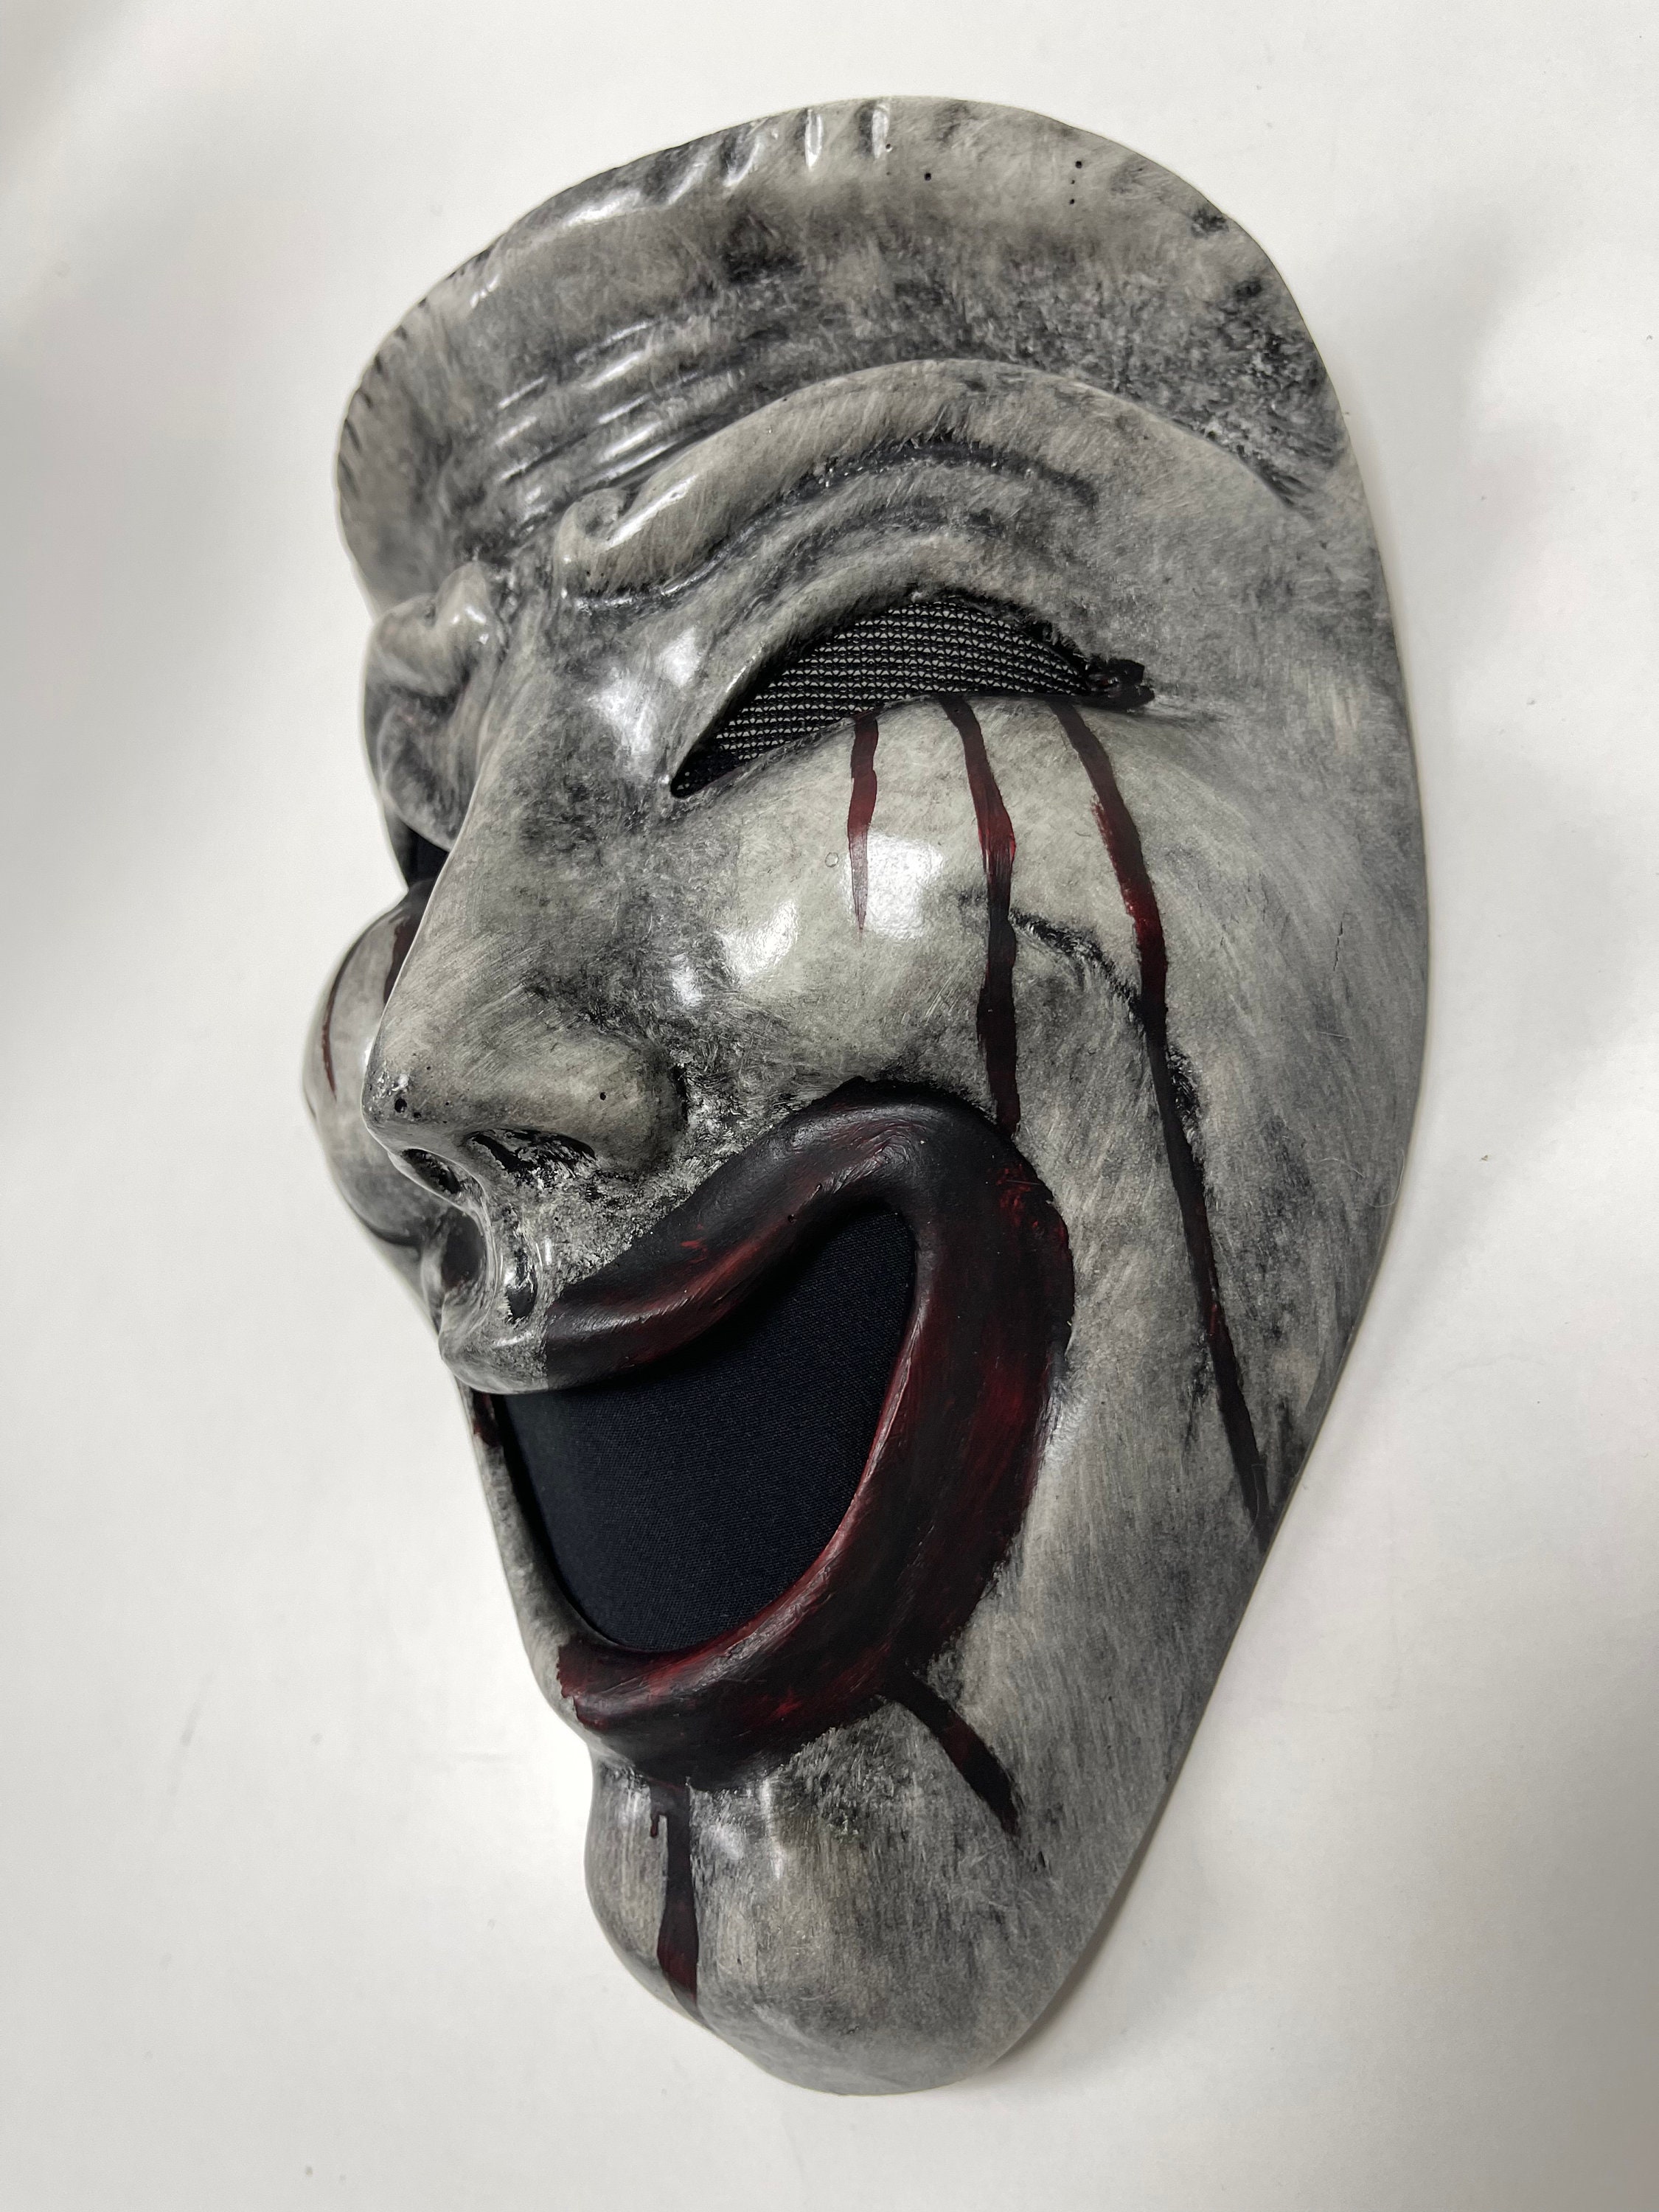 Blood Version SCP-035 Mask. Geek Comedy Mask. Own Mask 